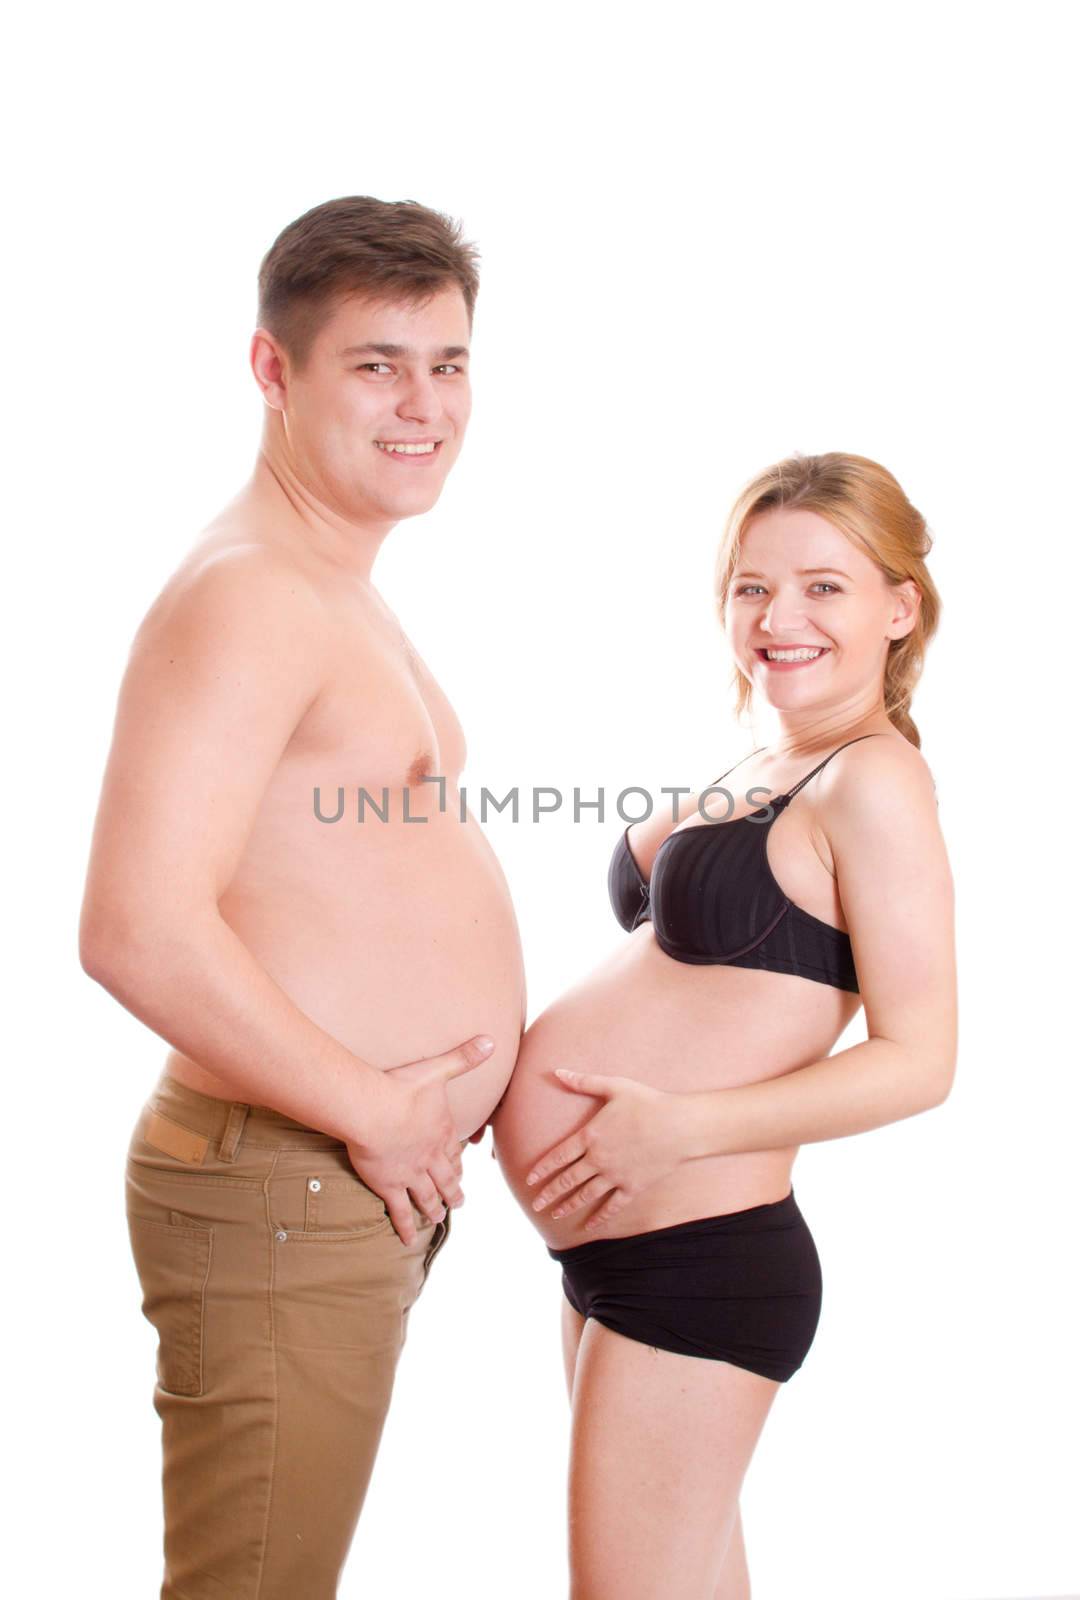 Pregnant woman and fat man by Irina1977